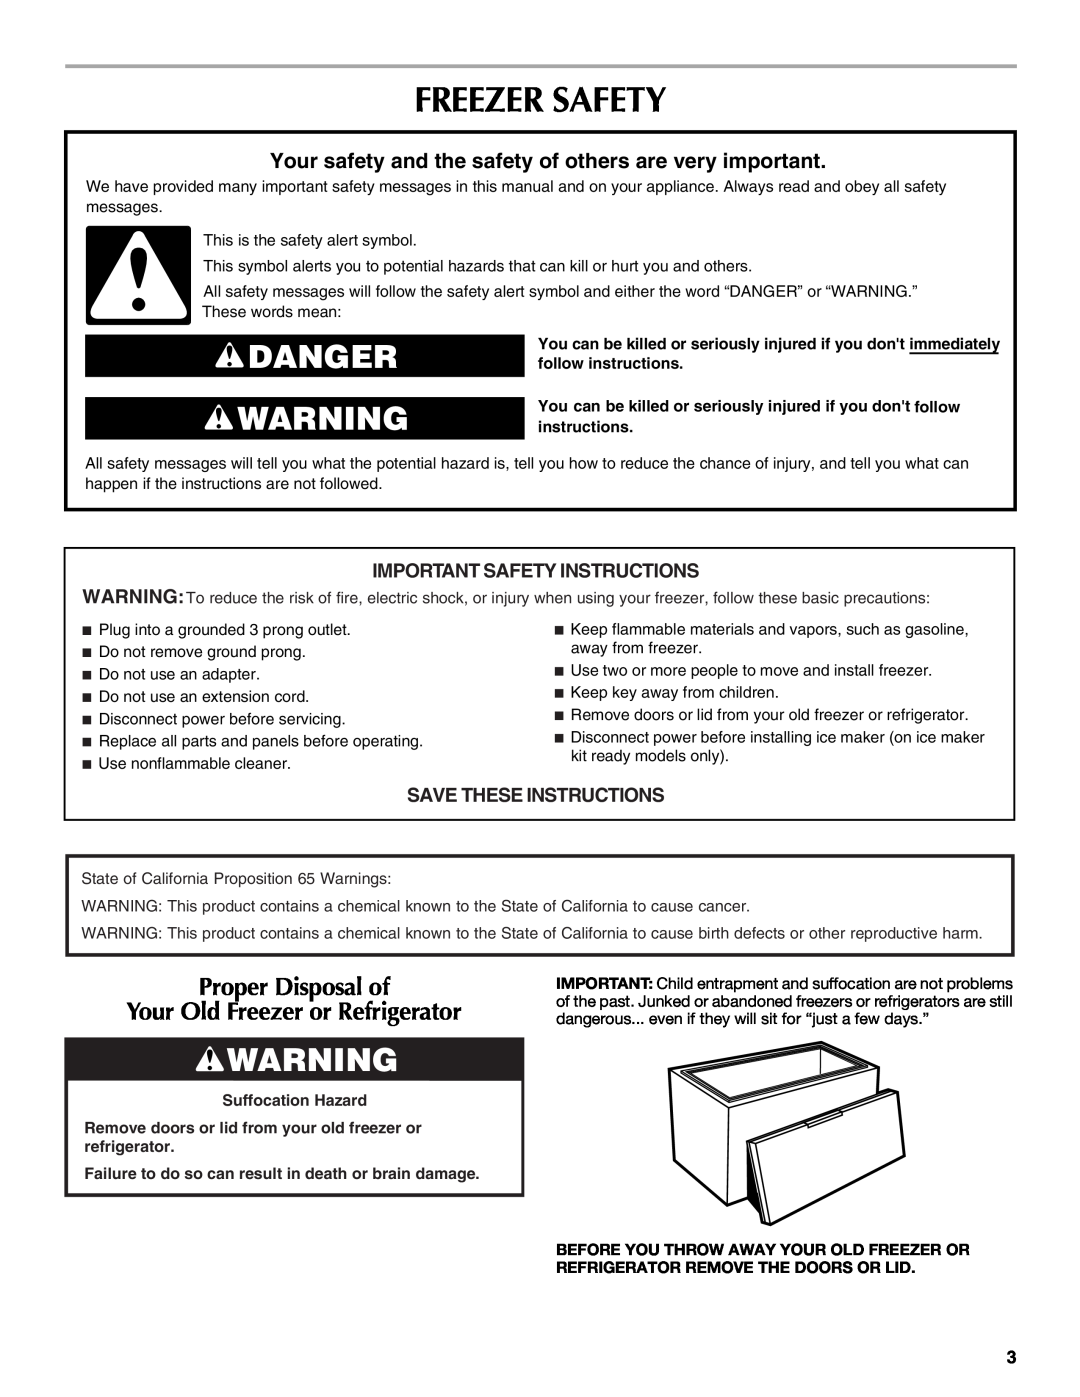 Maytag W10326795A Freezer Safety, Danger, Proper Disposal of Your Old Freezer or Refrigerator, Save These Instructions 